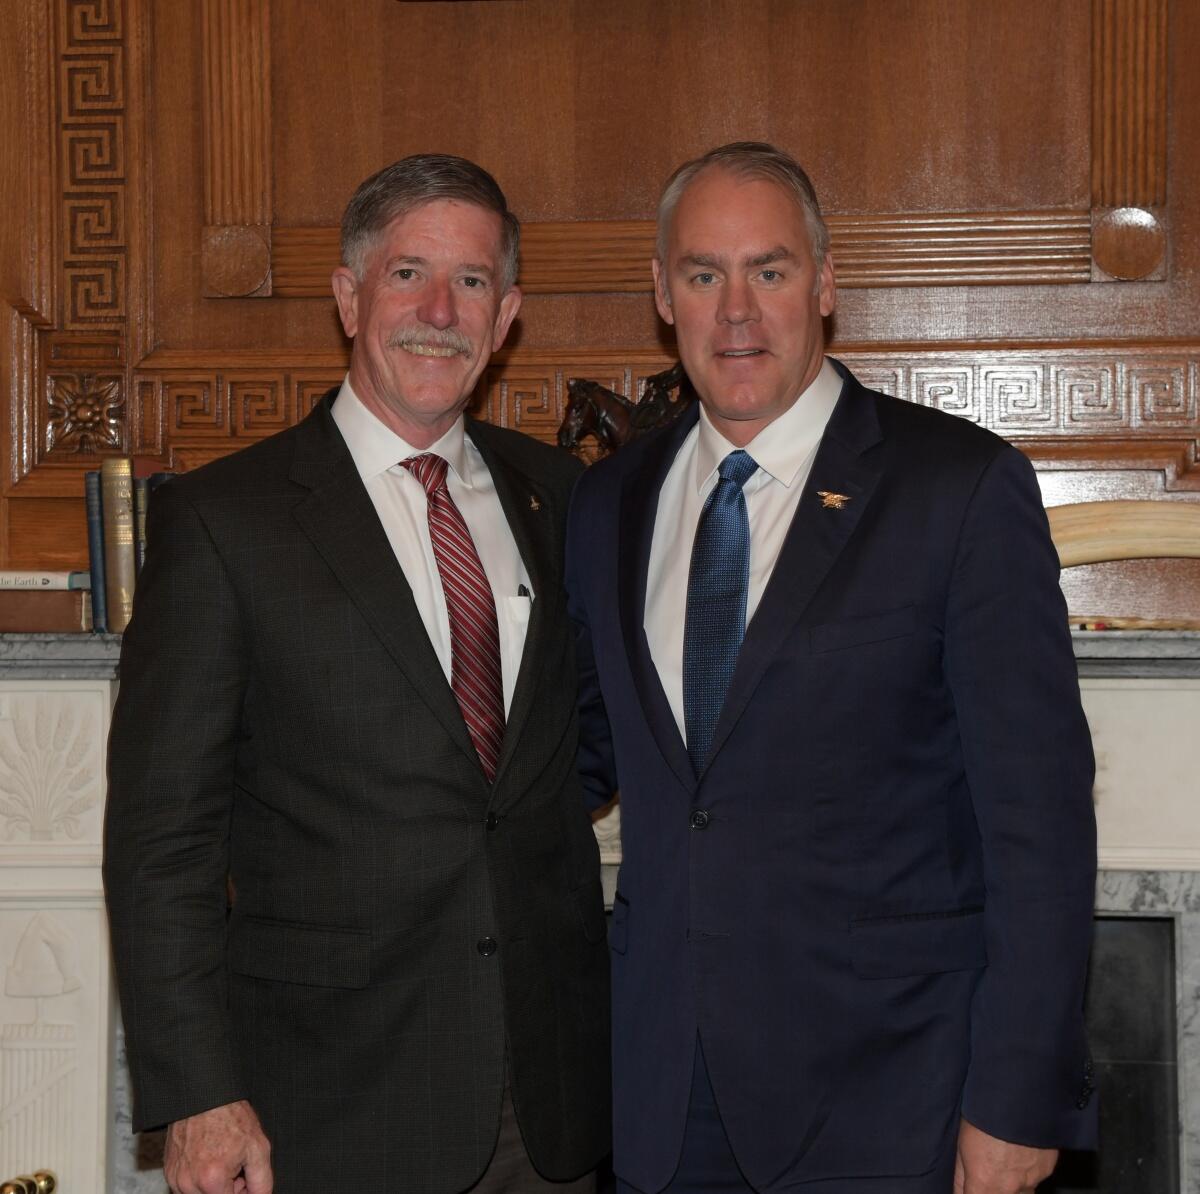 Secretary Zinke poses with Dr. Jim Reilly of the USGS.